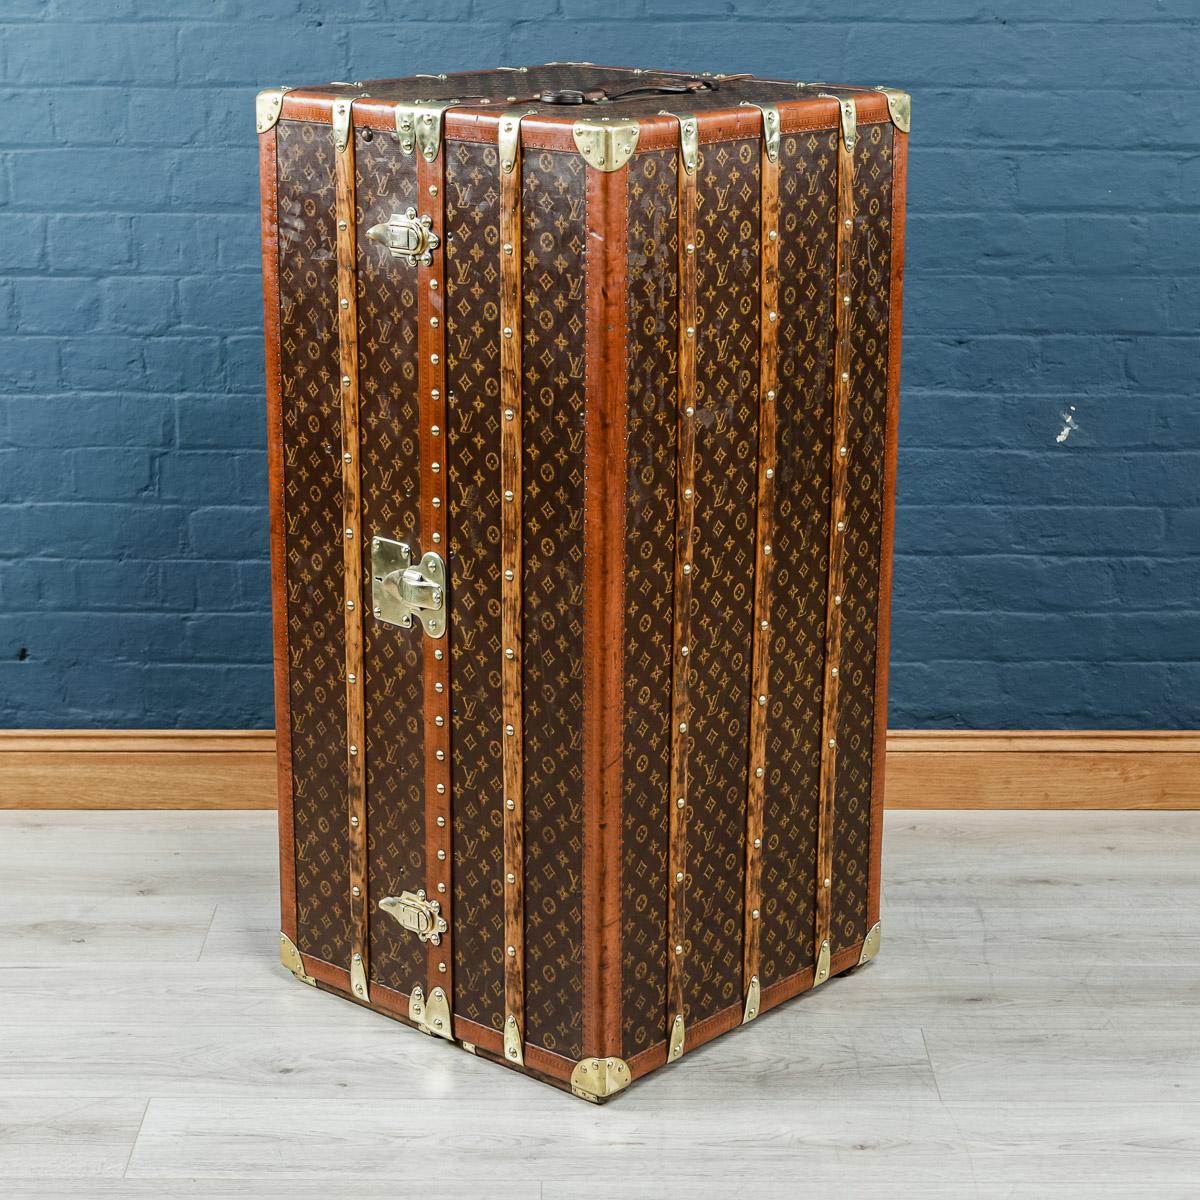 Stunning and most importantly complete, this early 20th century Louis Vuitton trunk was the must have item of any elite traveller. Covered in the world famous LV monogrammed canvas, with its lozine borders and brass fitting it would have been the